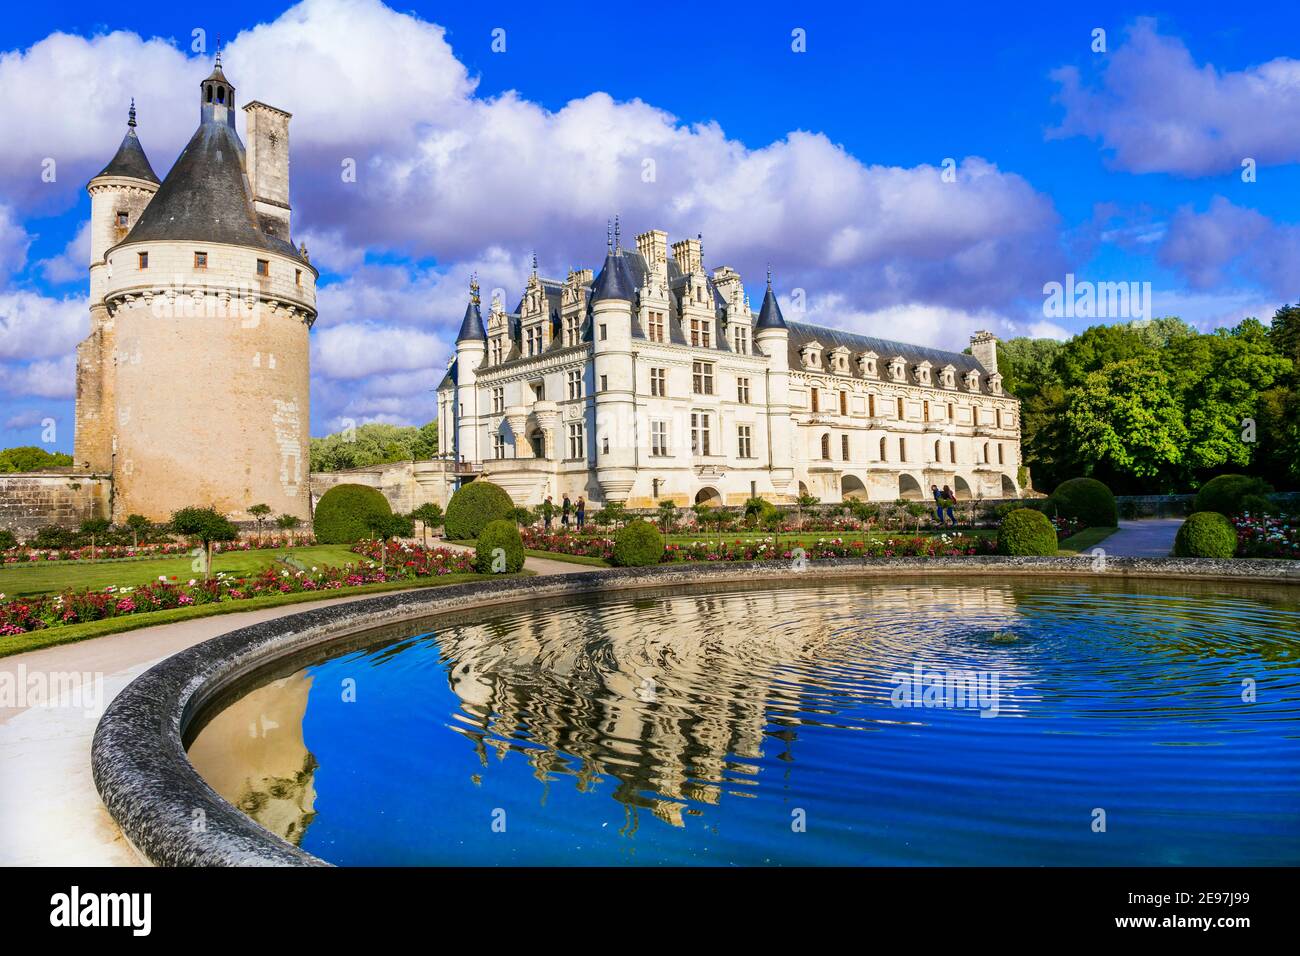 Elegant Chenonceau castle - beautiful castles of Loire valley. France, travel and landmarks Stock Photo